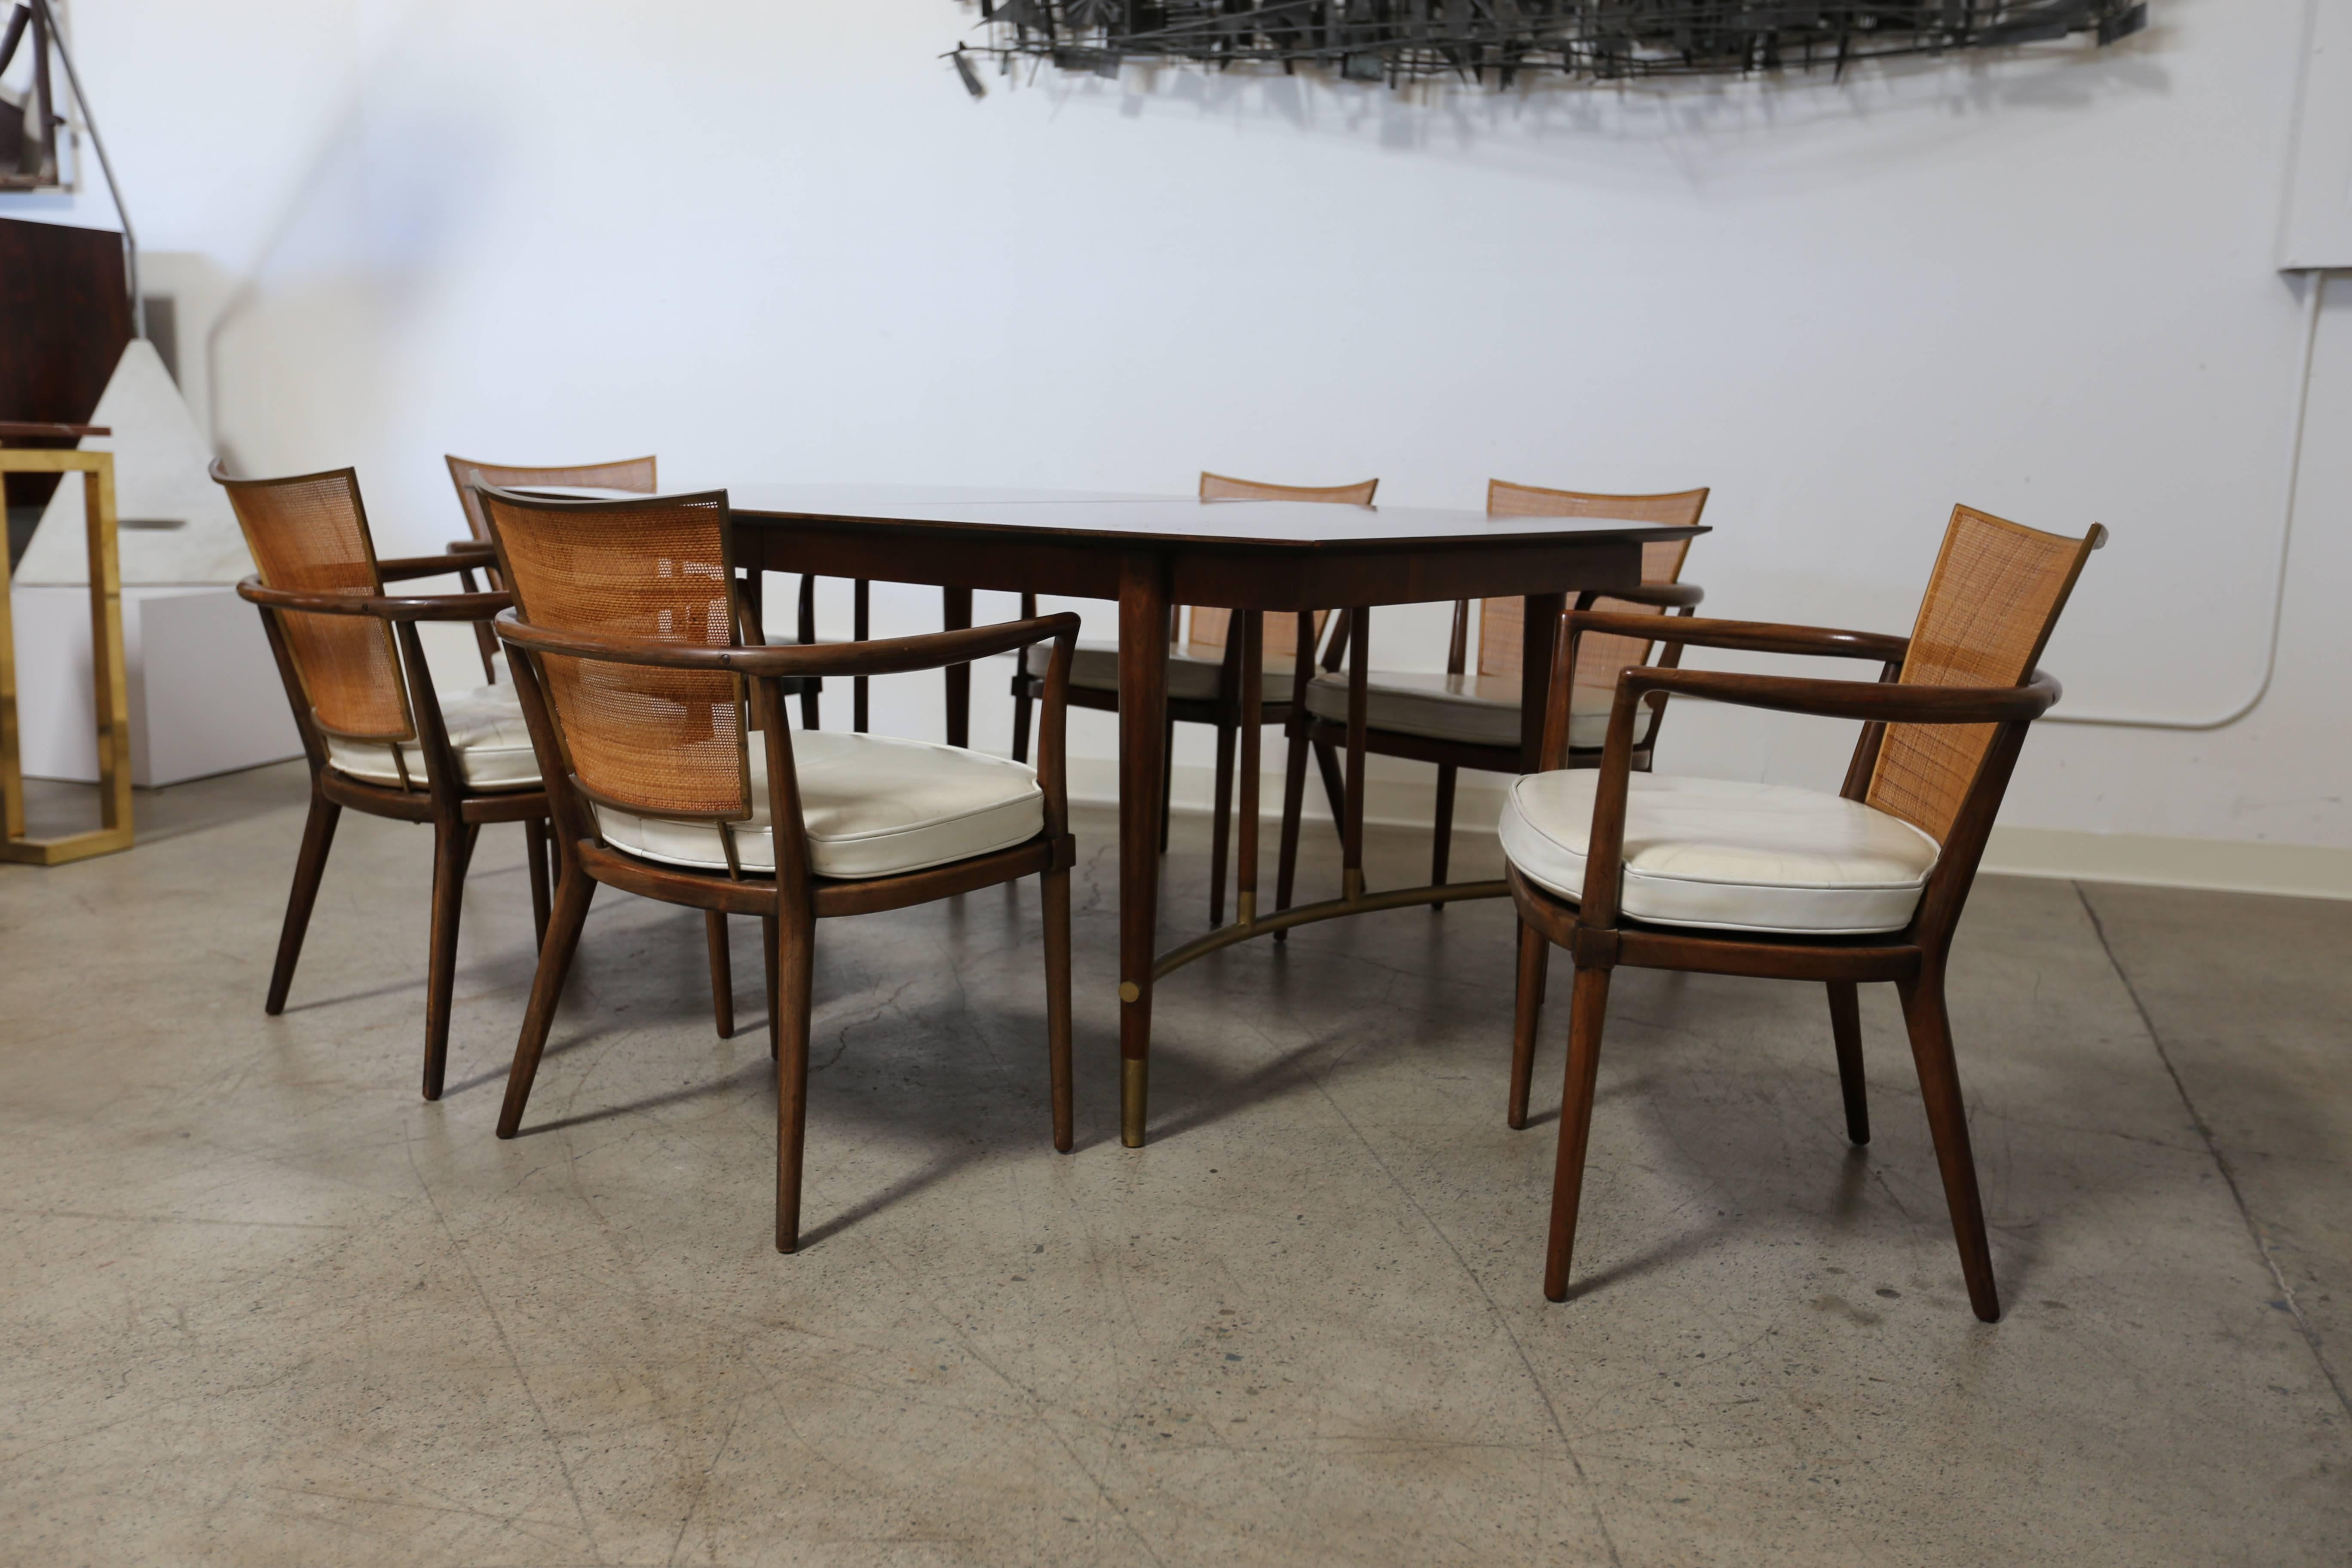 Dining set by Bert England for Johnson Furniture Company. Set of six cane back and leather dining armchairs with dining table. This set retains three additional original leaves.

Each chair measures: 24.5